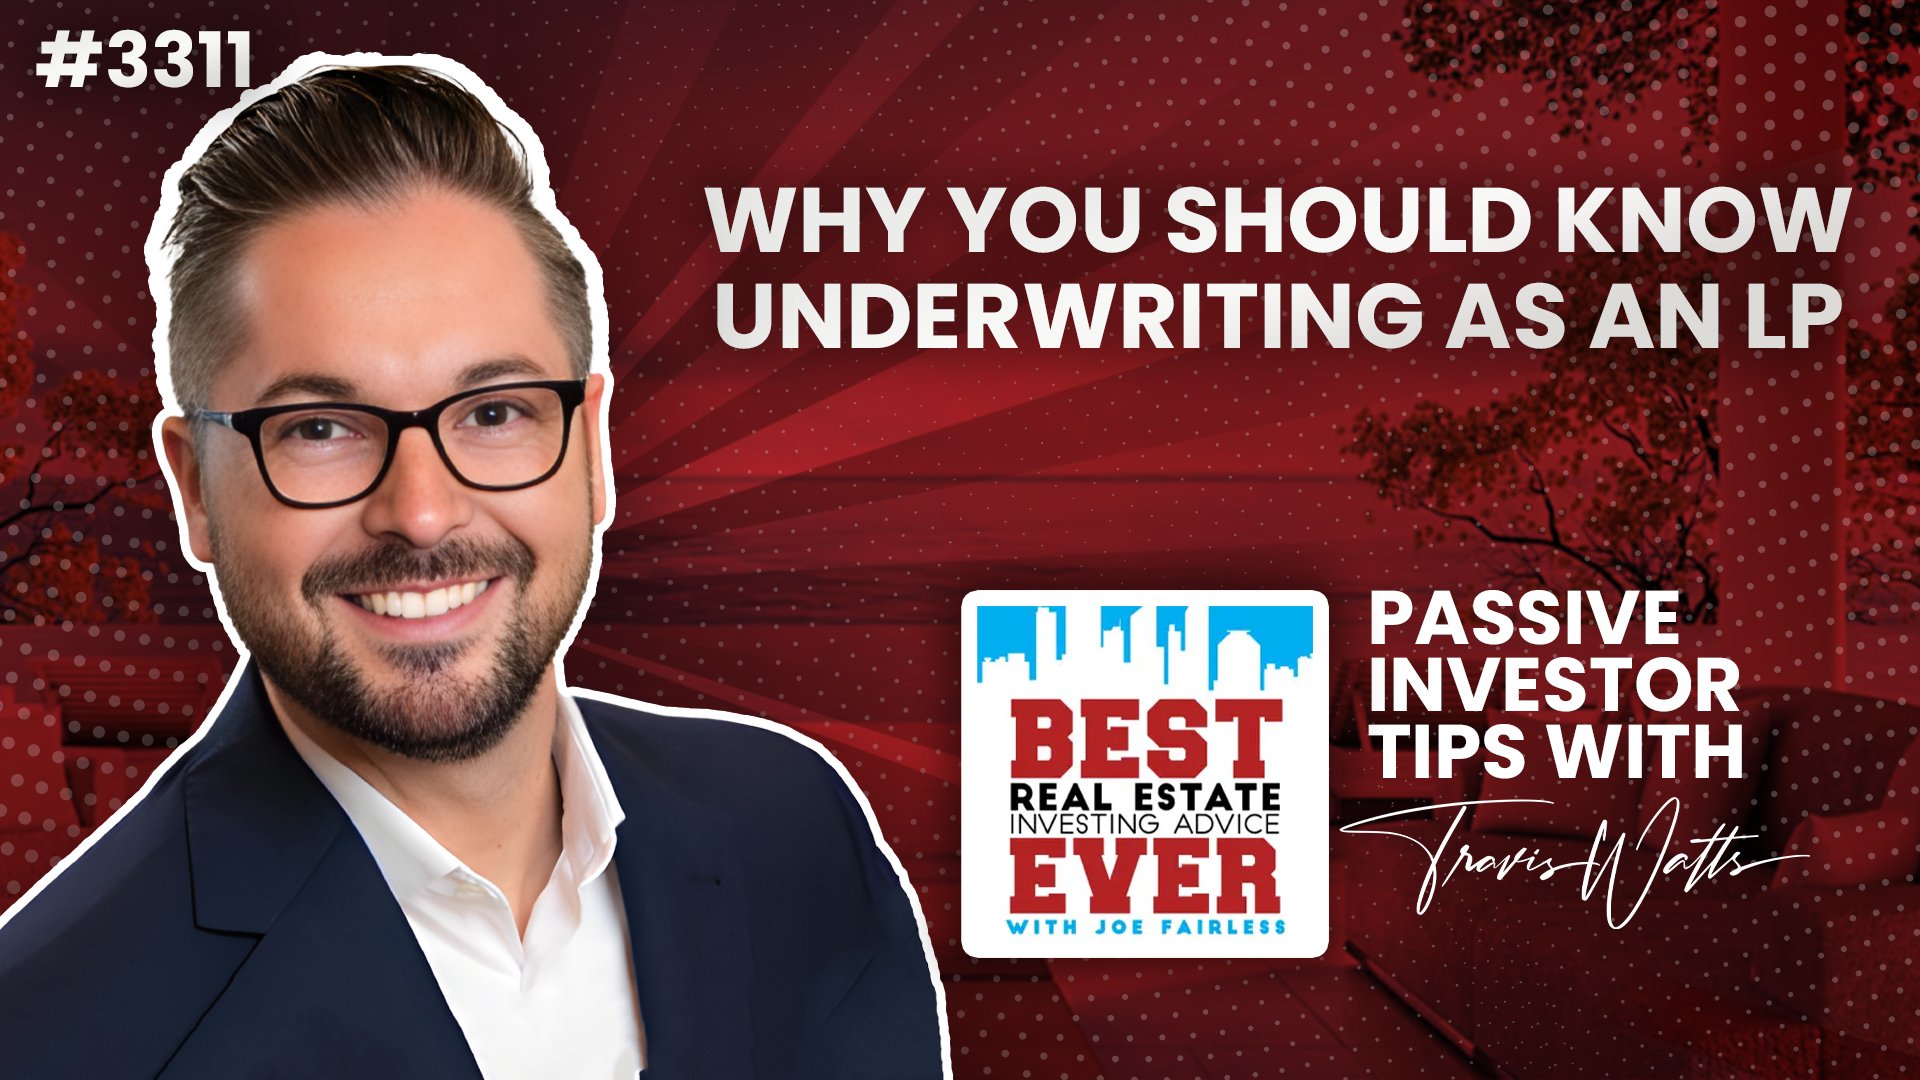 JF3311: Why You Should Know Underwriting as an LP | Passive Investor Tips ft. Travis Watts